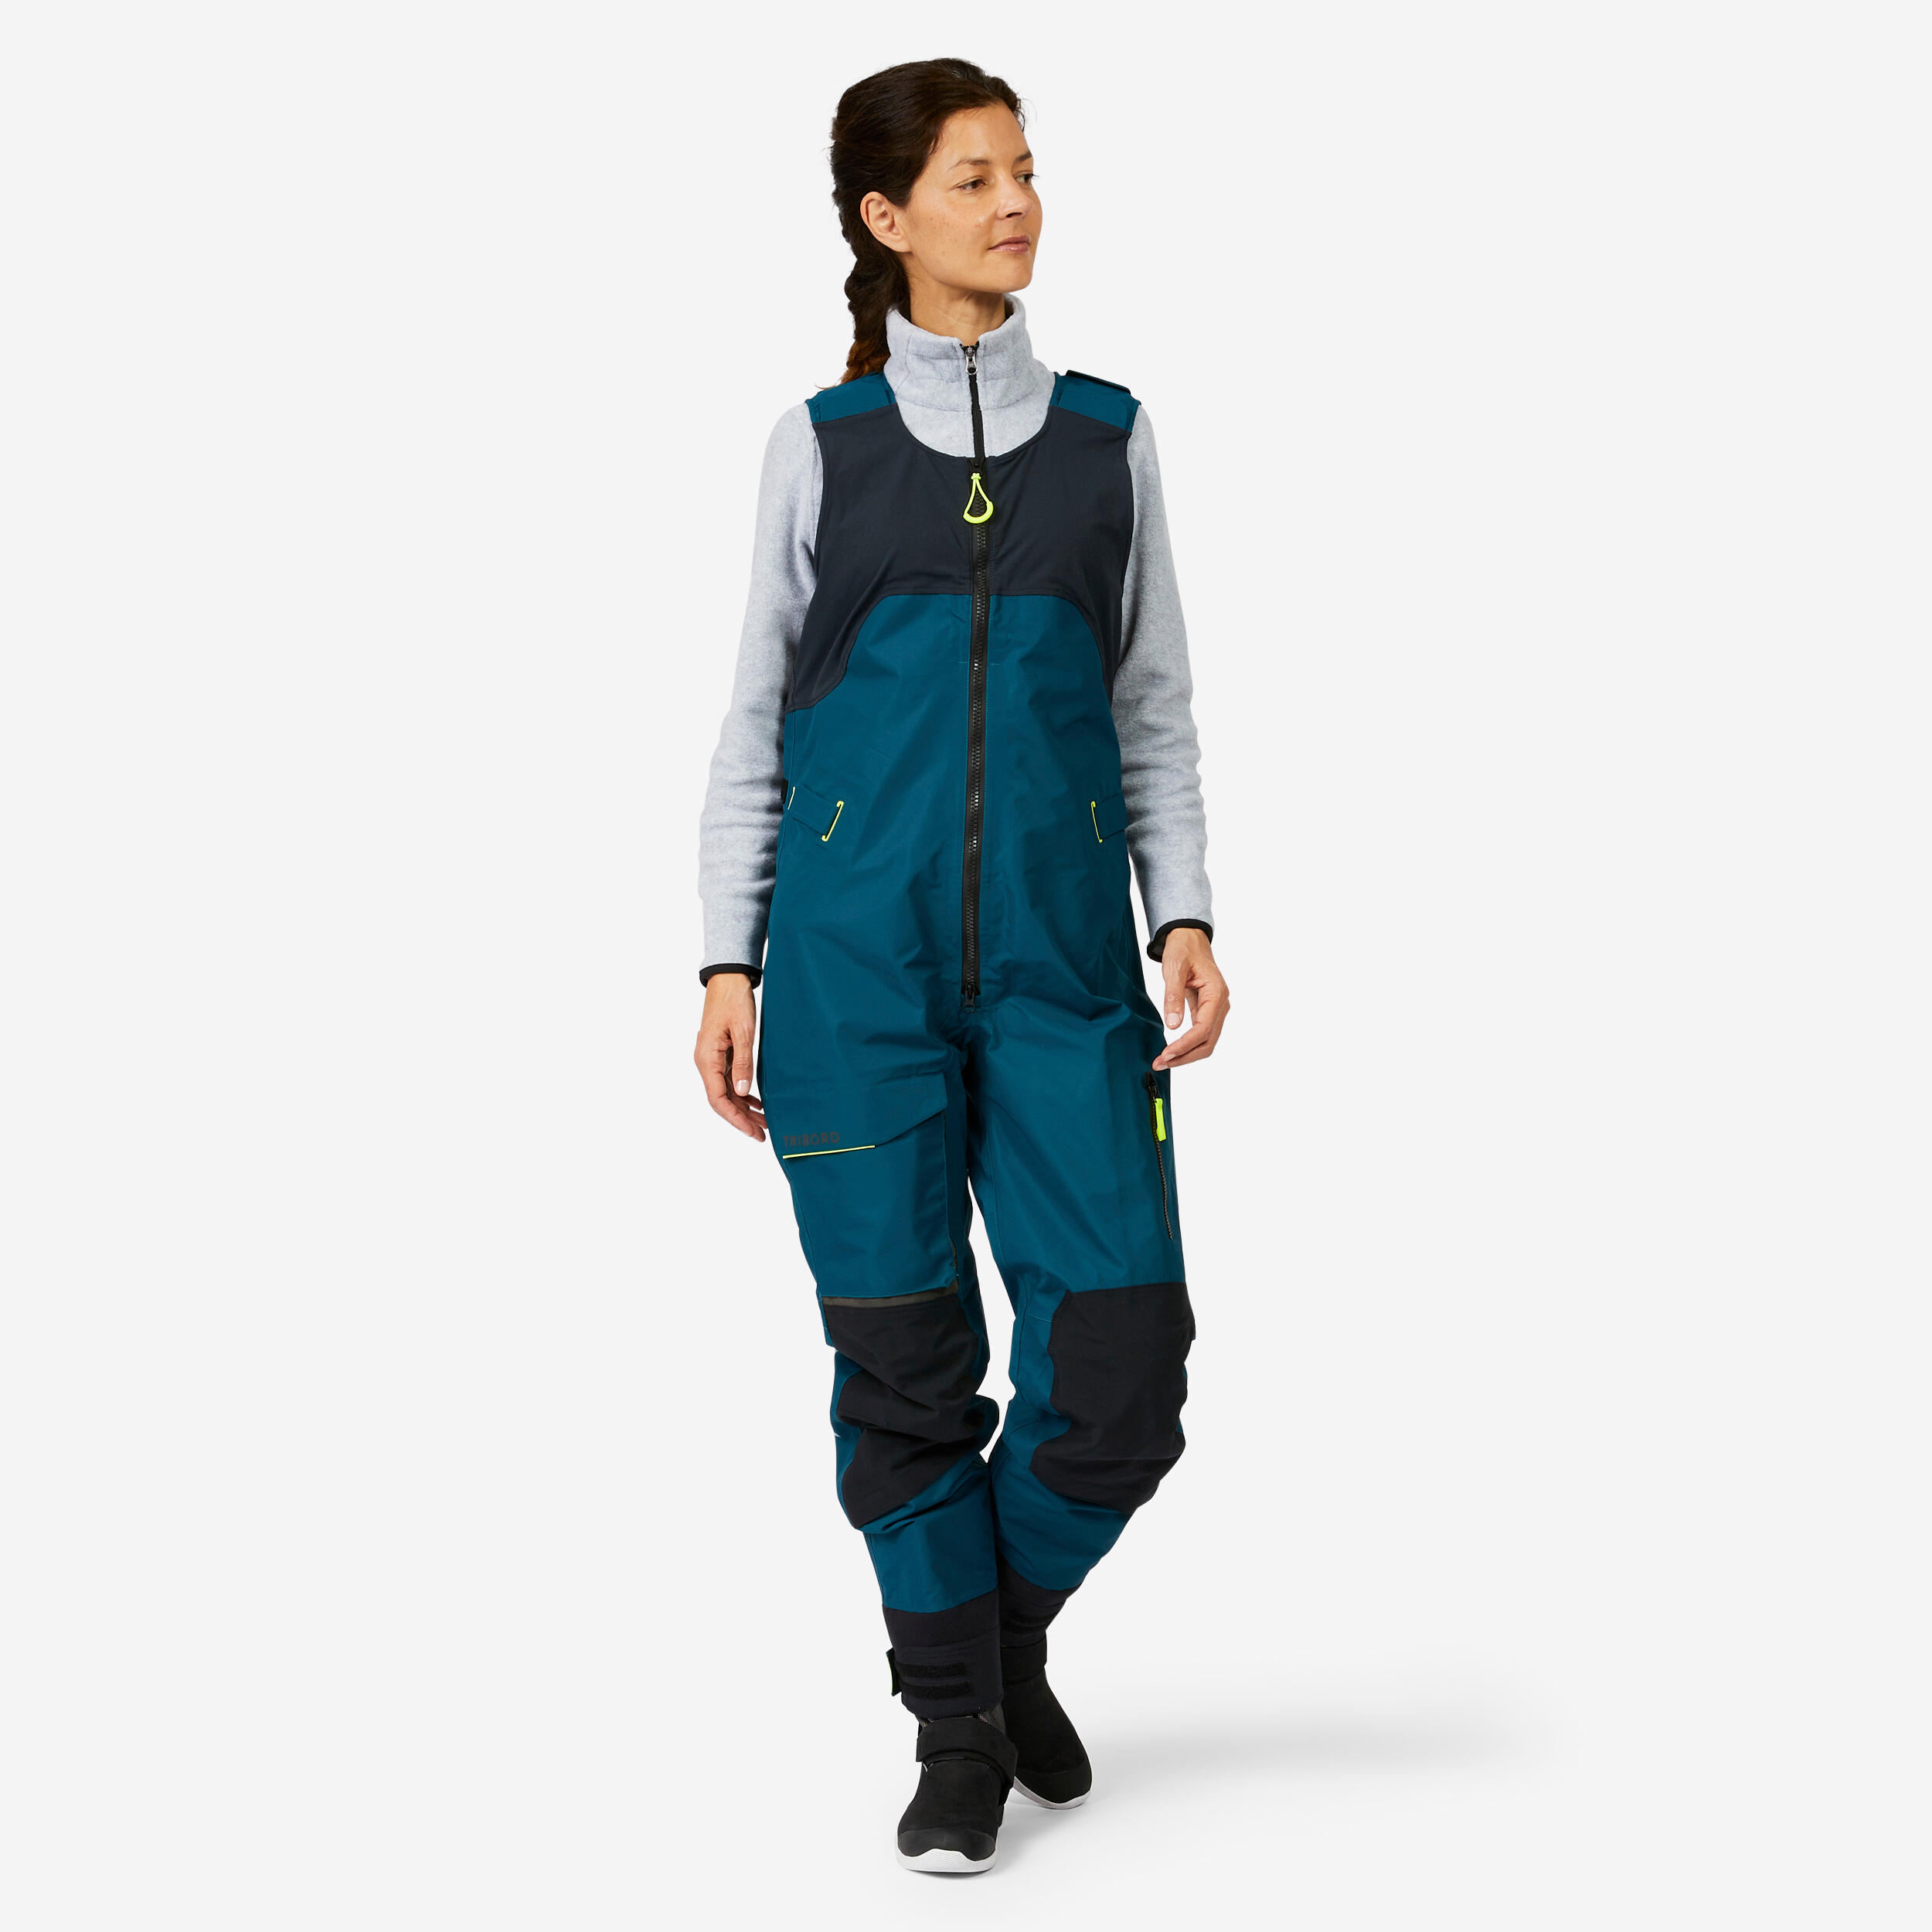 Adult Sailing overalls - Offshore Race 900 Petrol 2/16